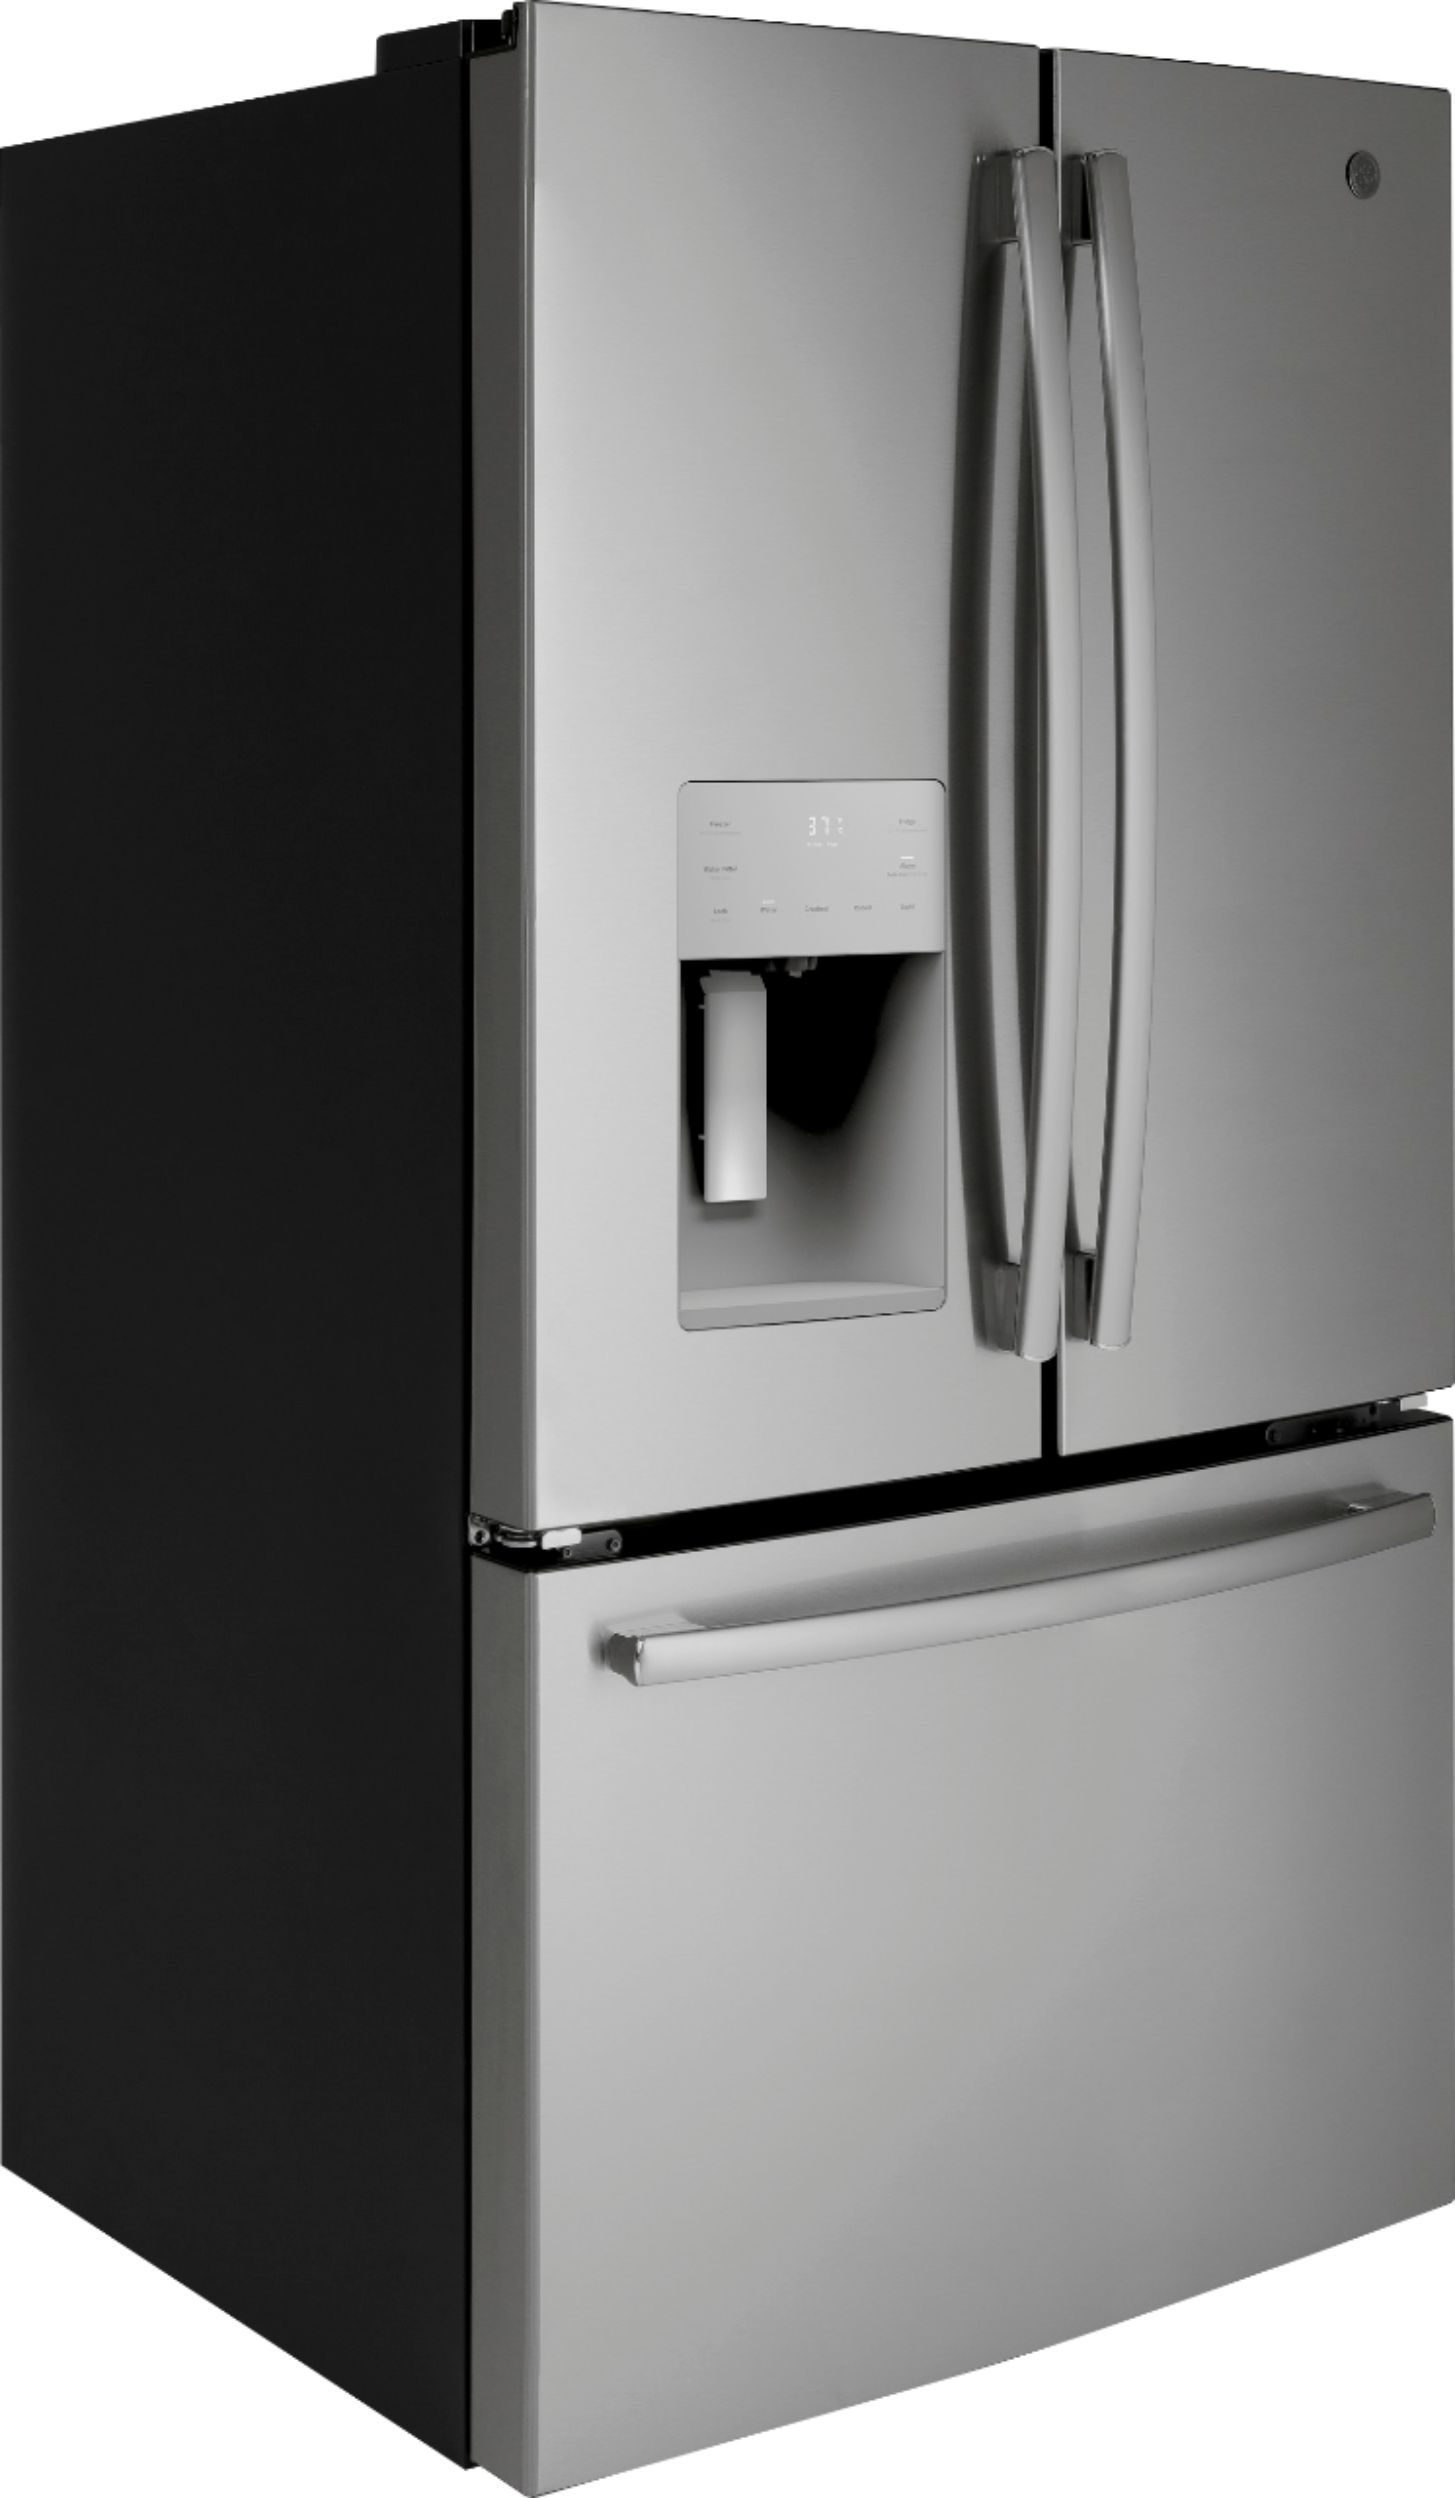 Angle View: GE - 25.8 Cu. Ft. French Door Refrigerator - Stainless steel